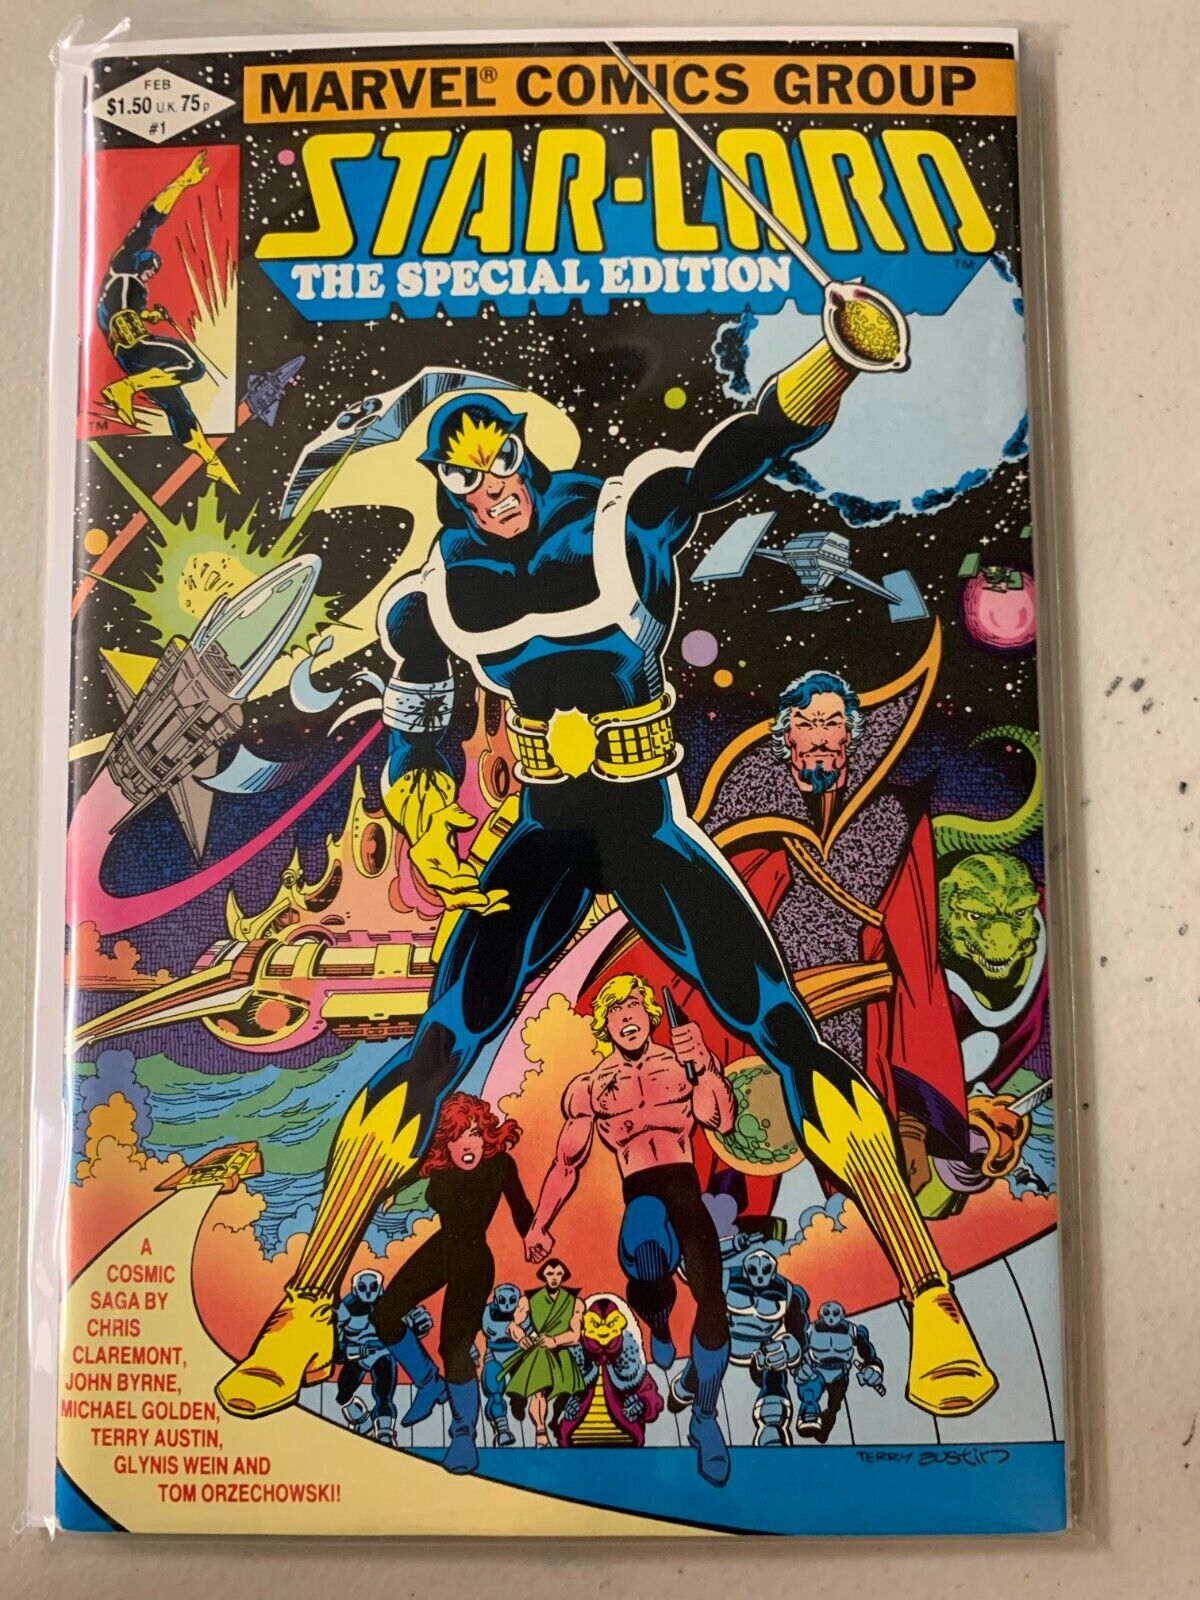 Star-lord The Special Edition #1 direct 8.0 (1982)